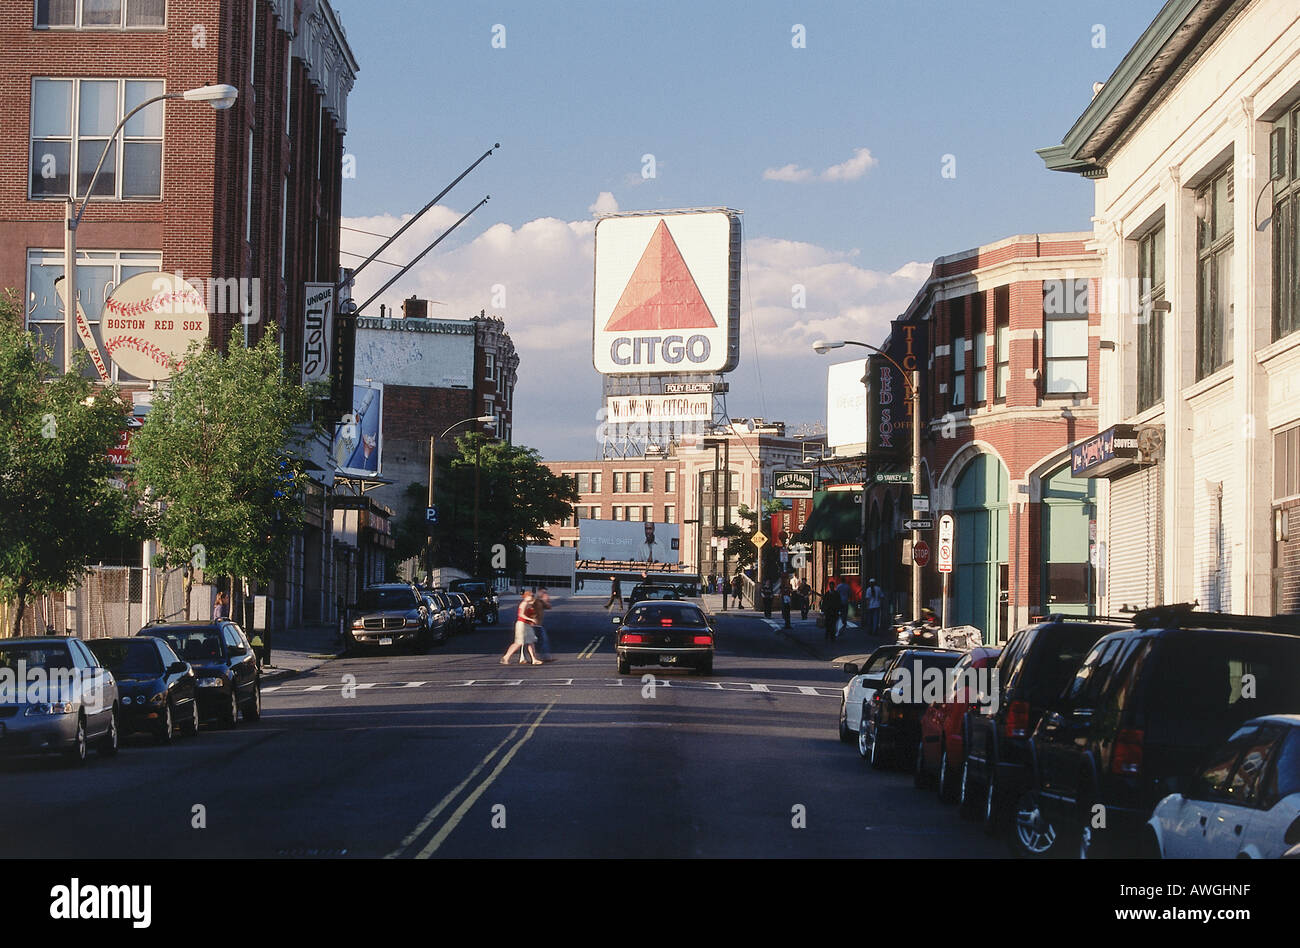 USA, Massachusetts, Boston, Kenmore Square, CITGO sign, prominent landmark dominating busy area of Boston lined with parked cars Stock Photo